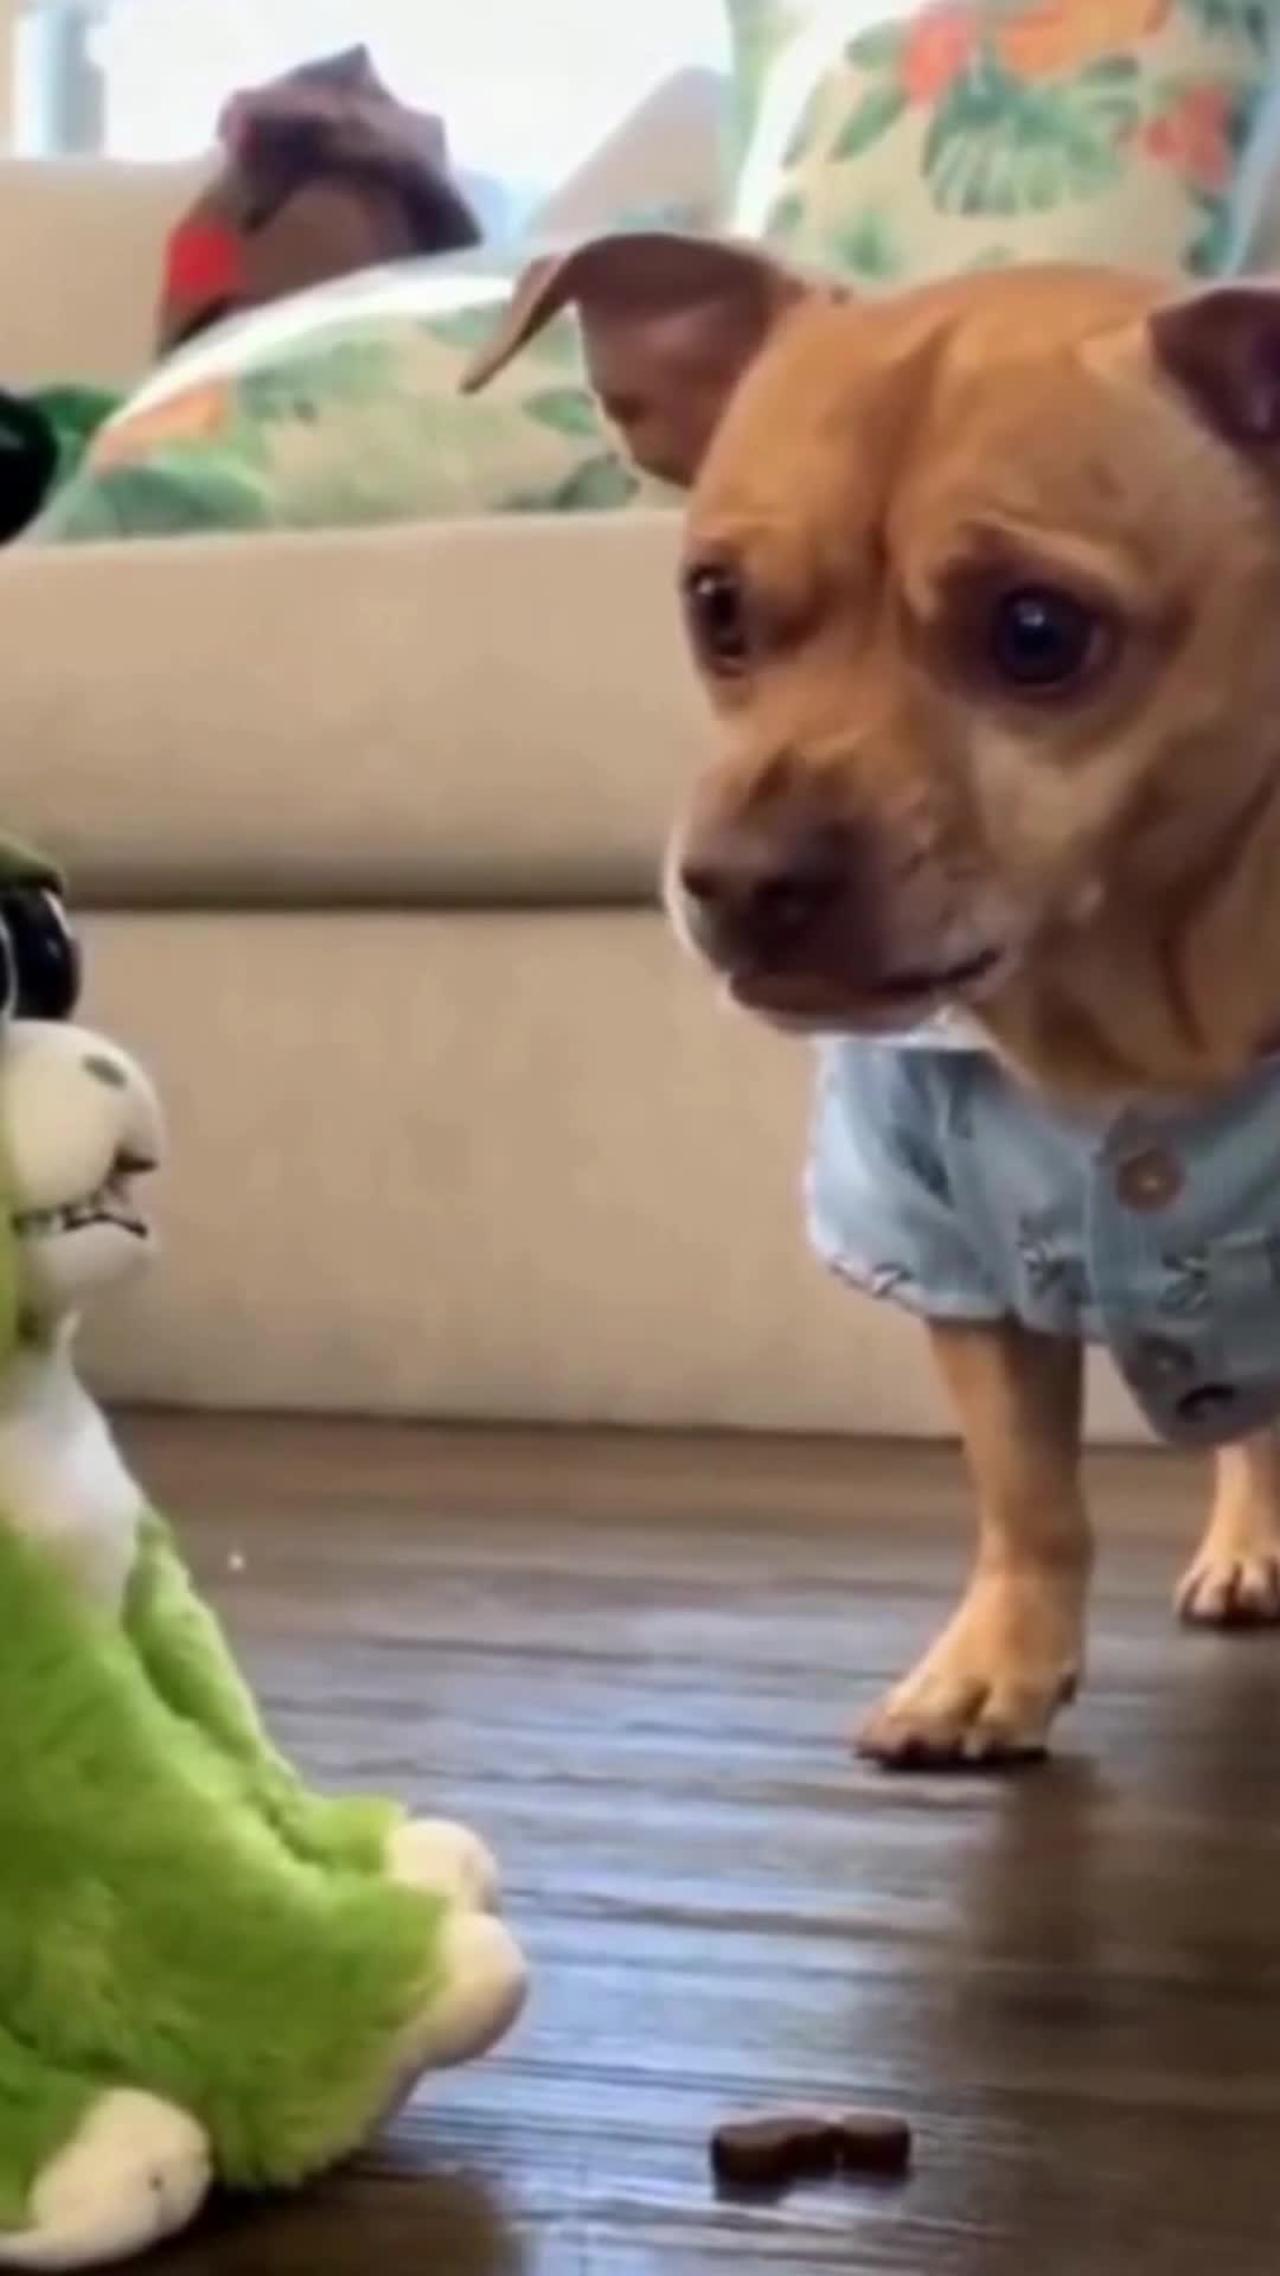 #Very Funny Dog & Cat Video